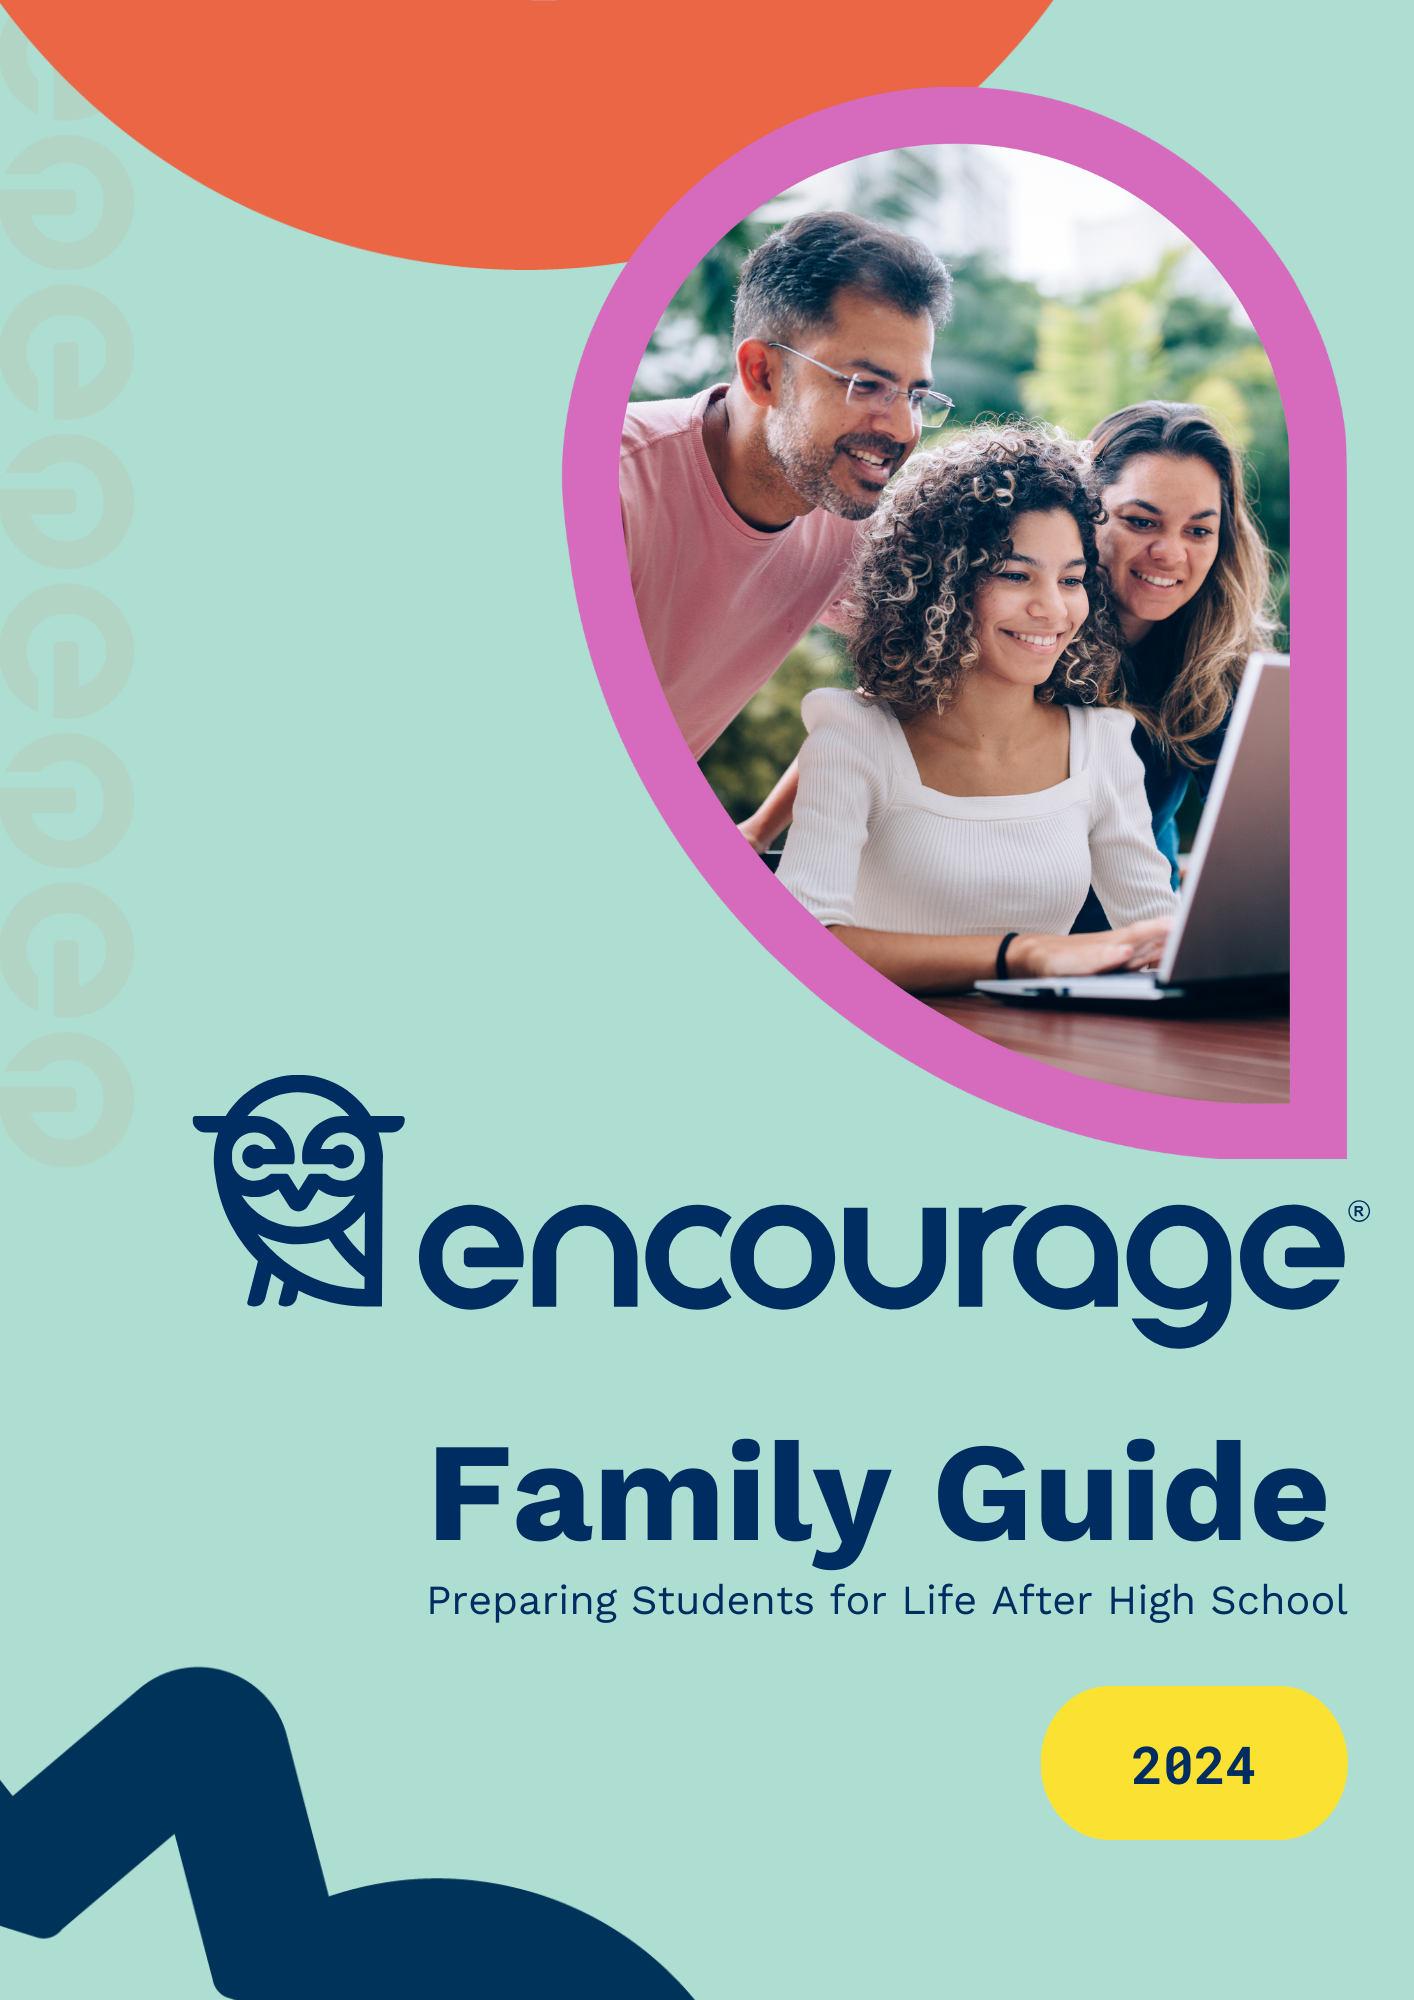 Image of Family Guide from Encourage®